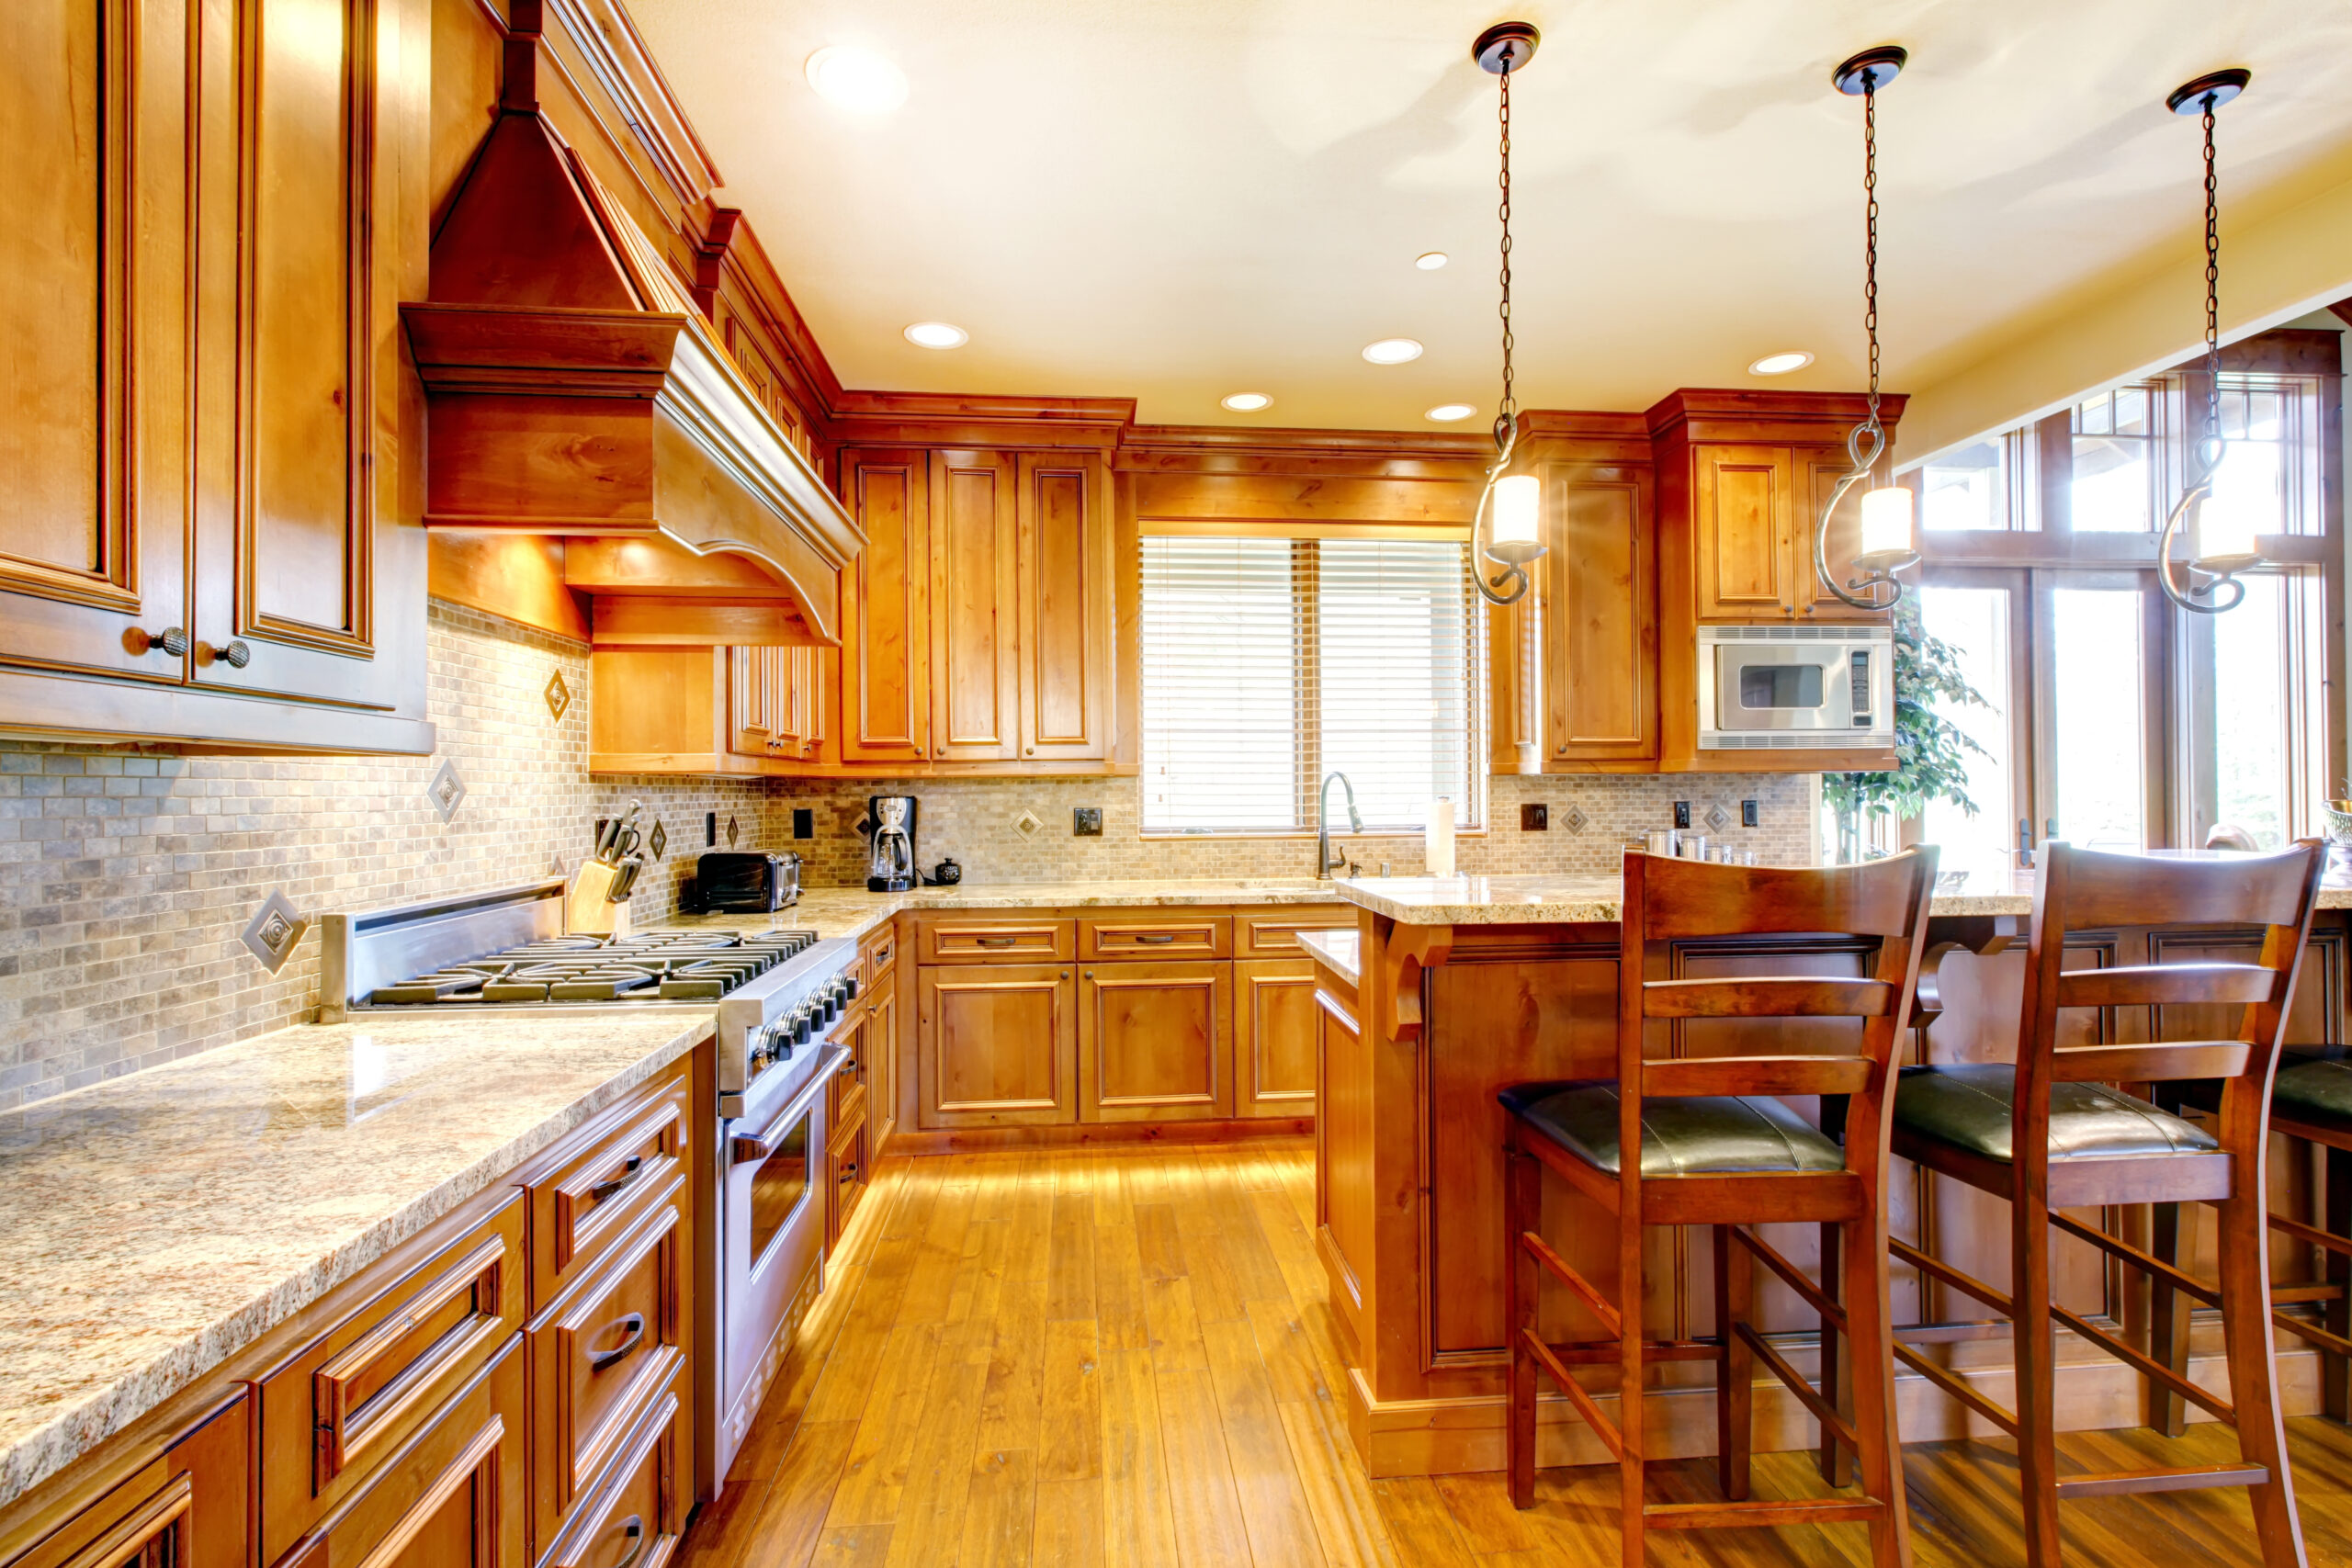 Brilliant kitchen with stained wood cabinets and hardwood floor.